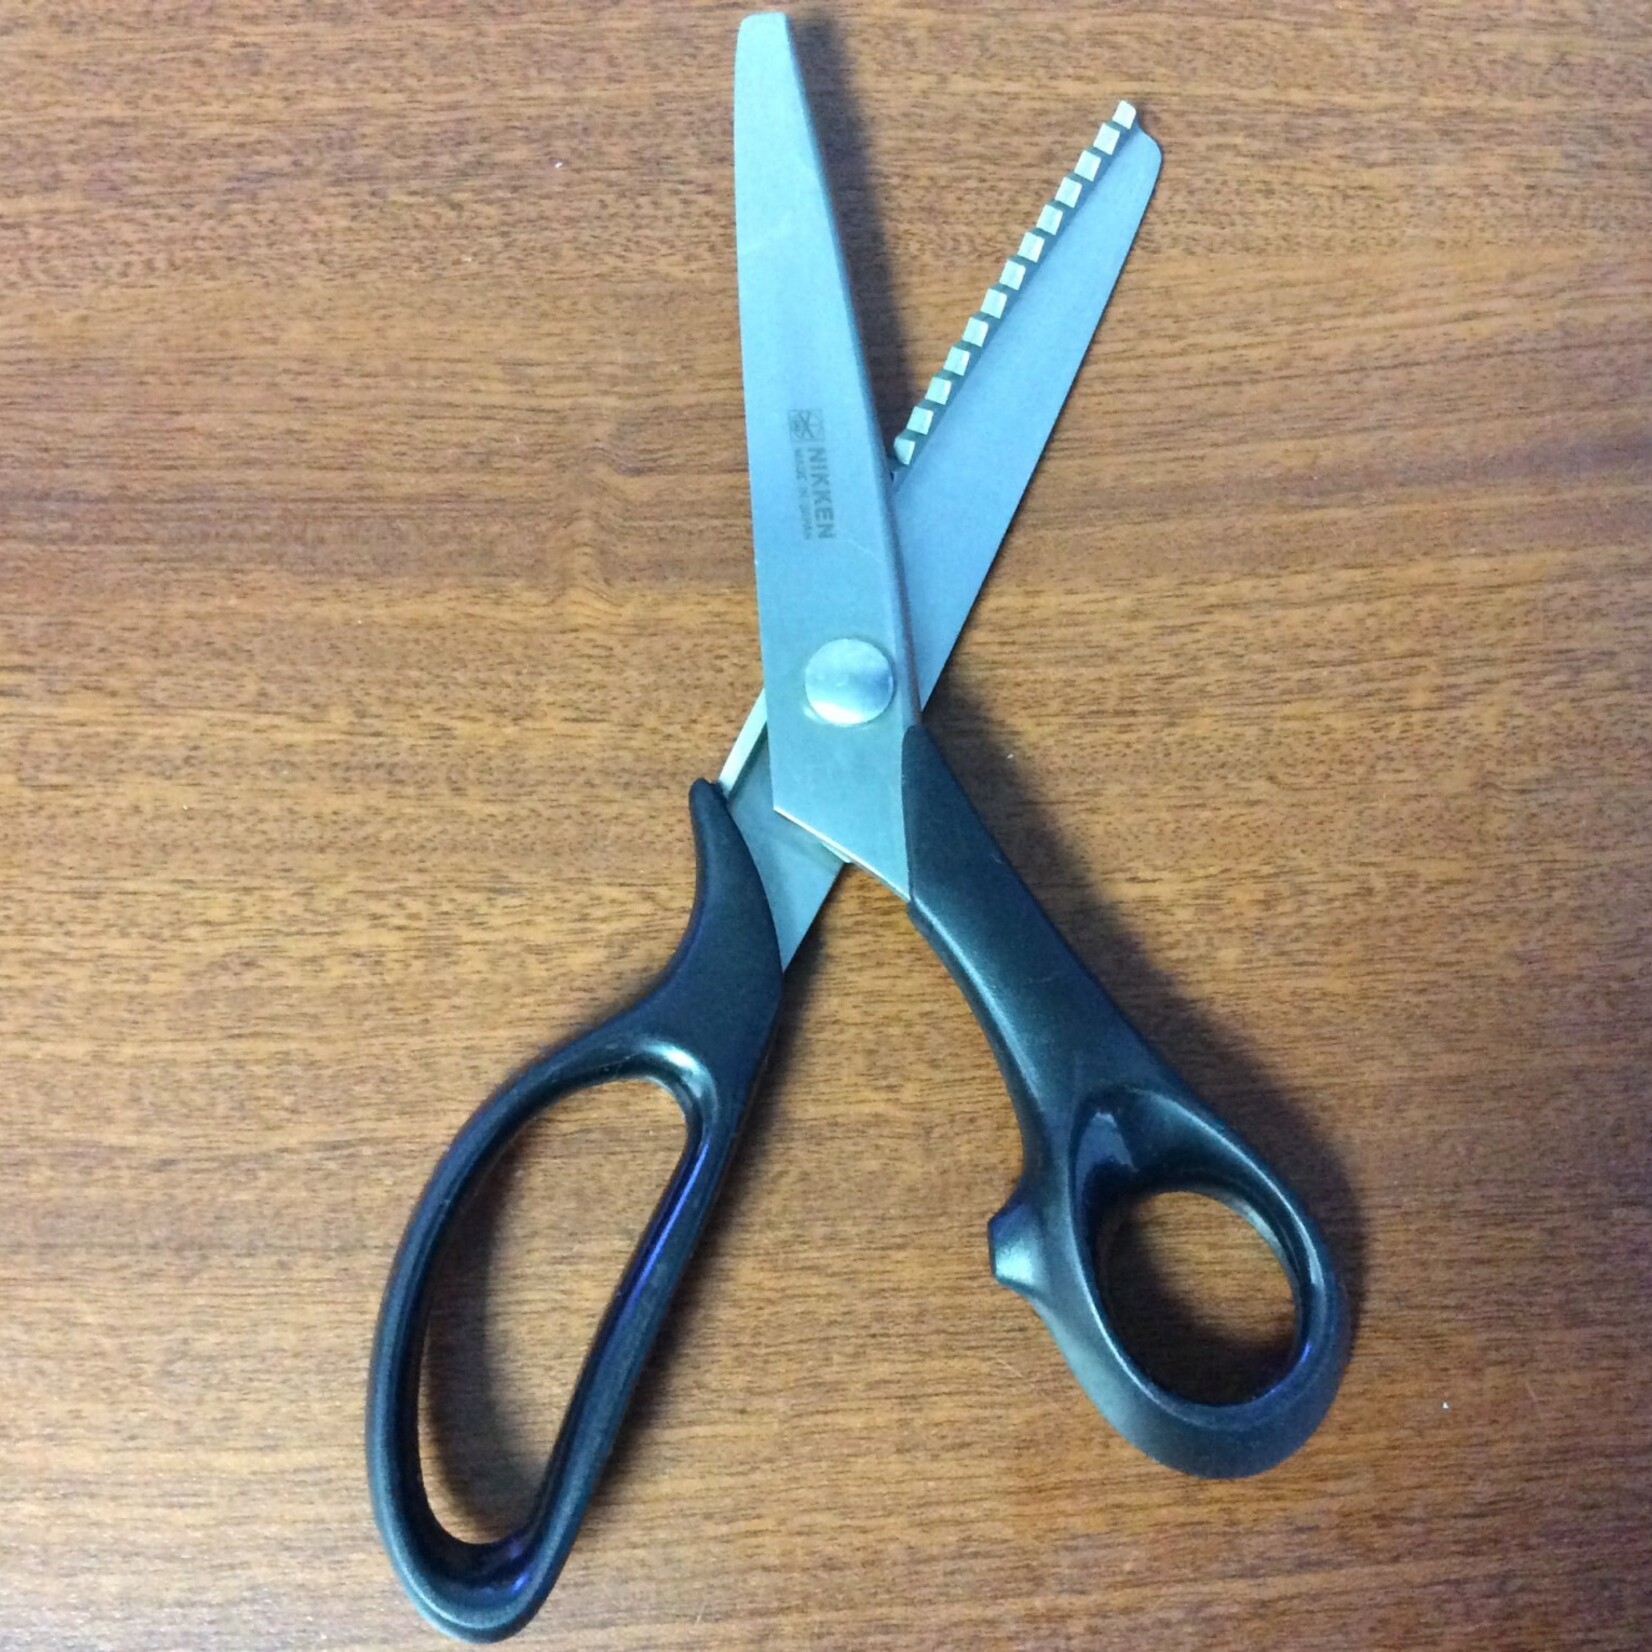 Pinking Shears (Scissors) Black & Silver 8 Inches